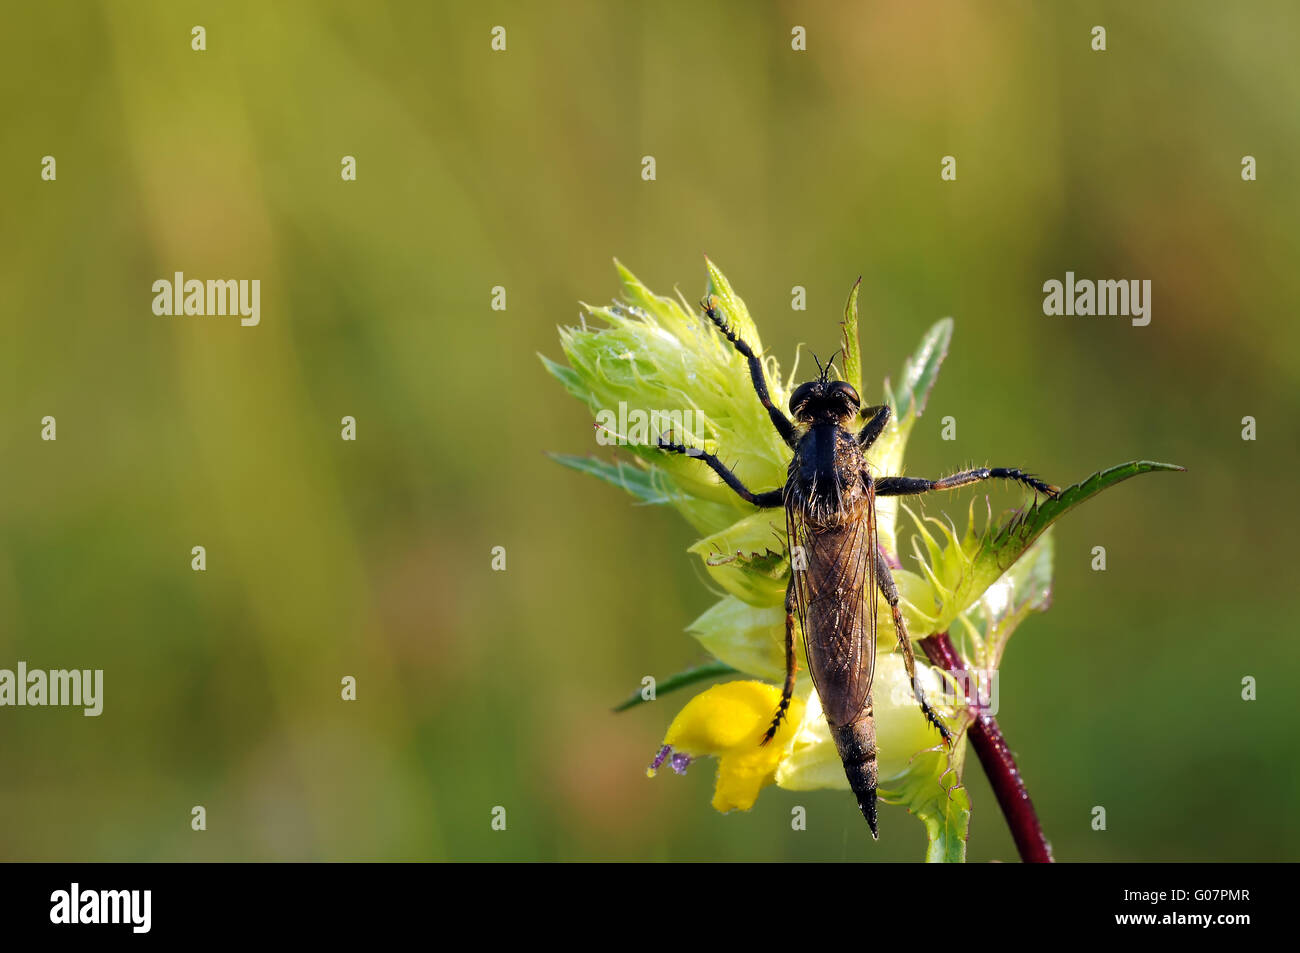 robber fly from behind Stock Photo